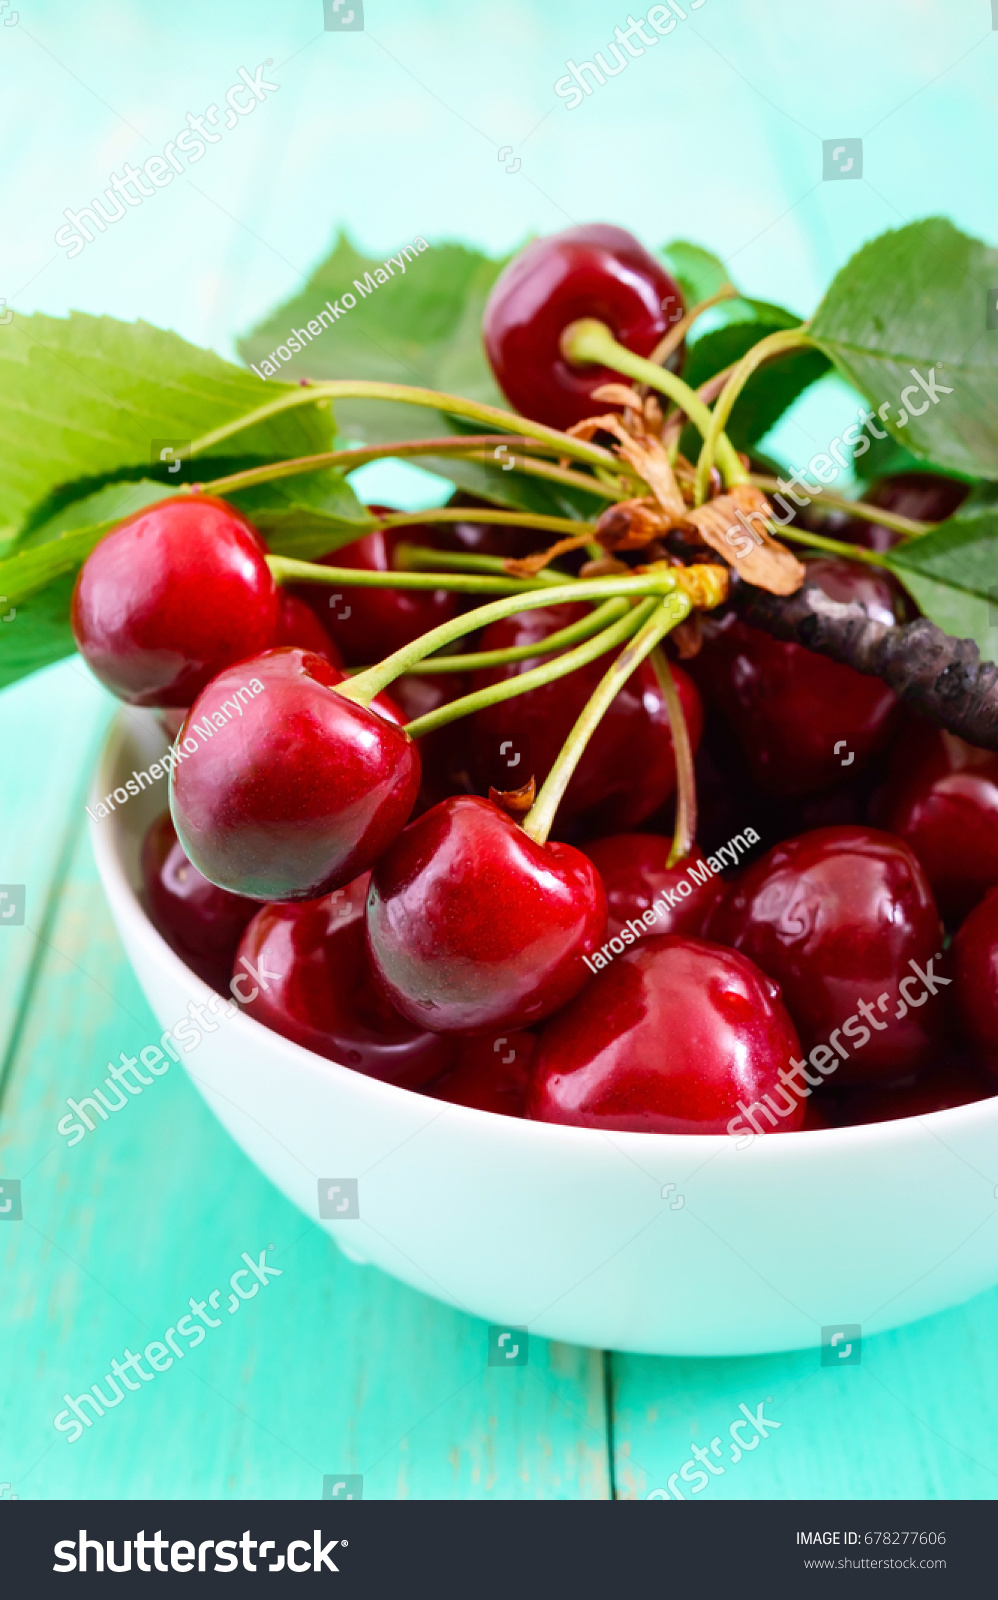 Ripe juicy red cherries in a ceramic bowl on a bright wooden background.  Vertical view #678277606